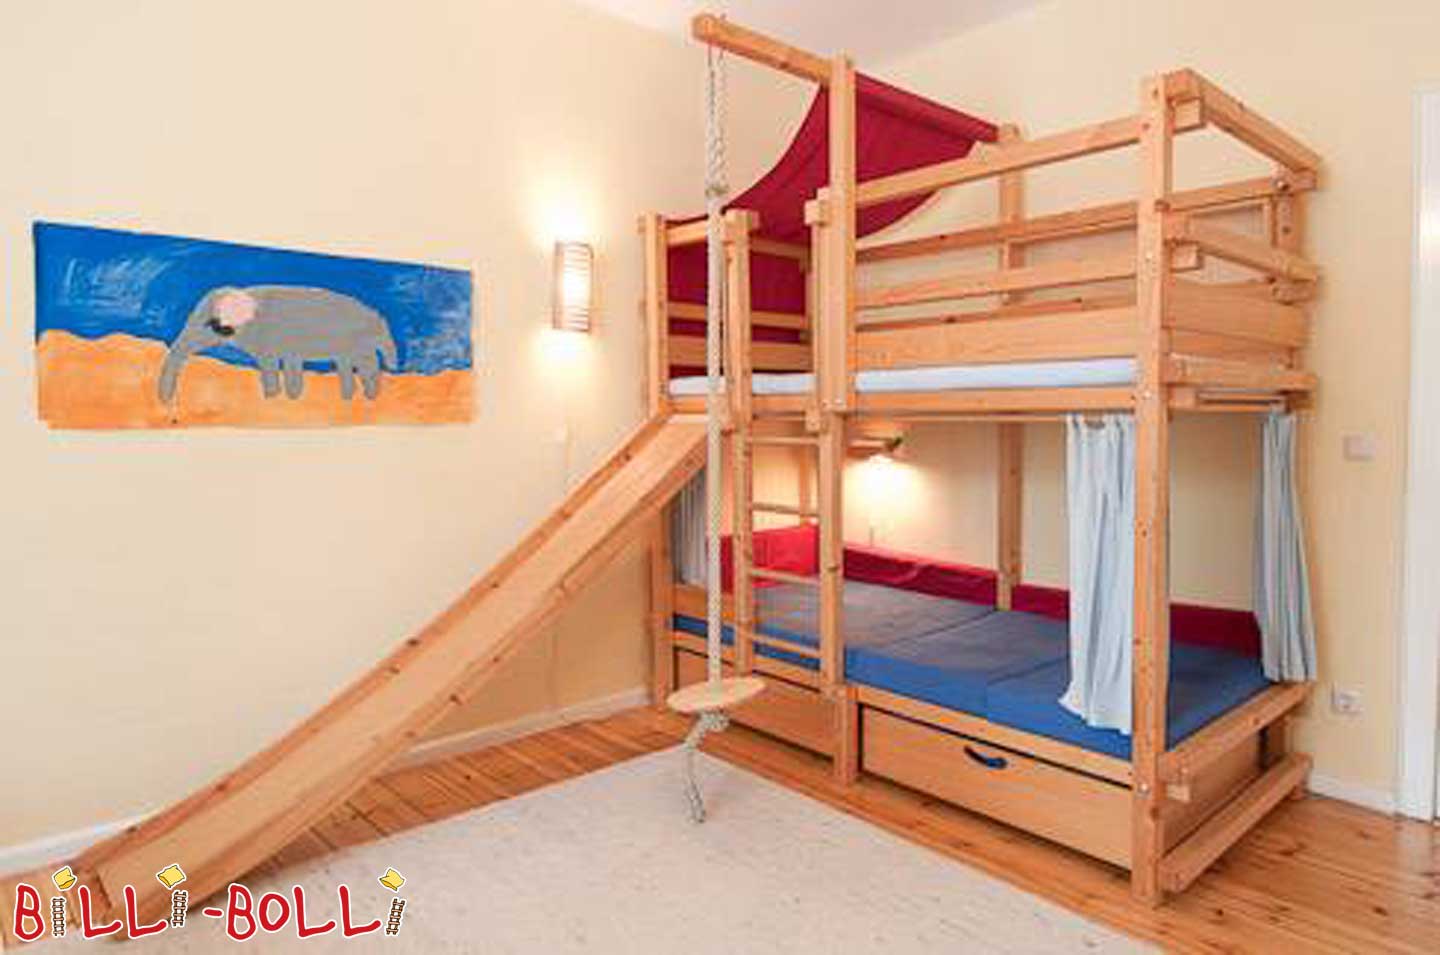 Billi Bolli bunk bed (Category: second hand bunk bed)